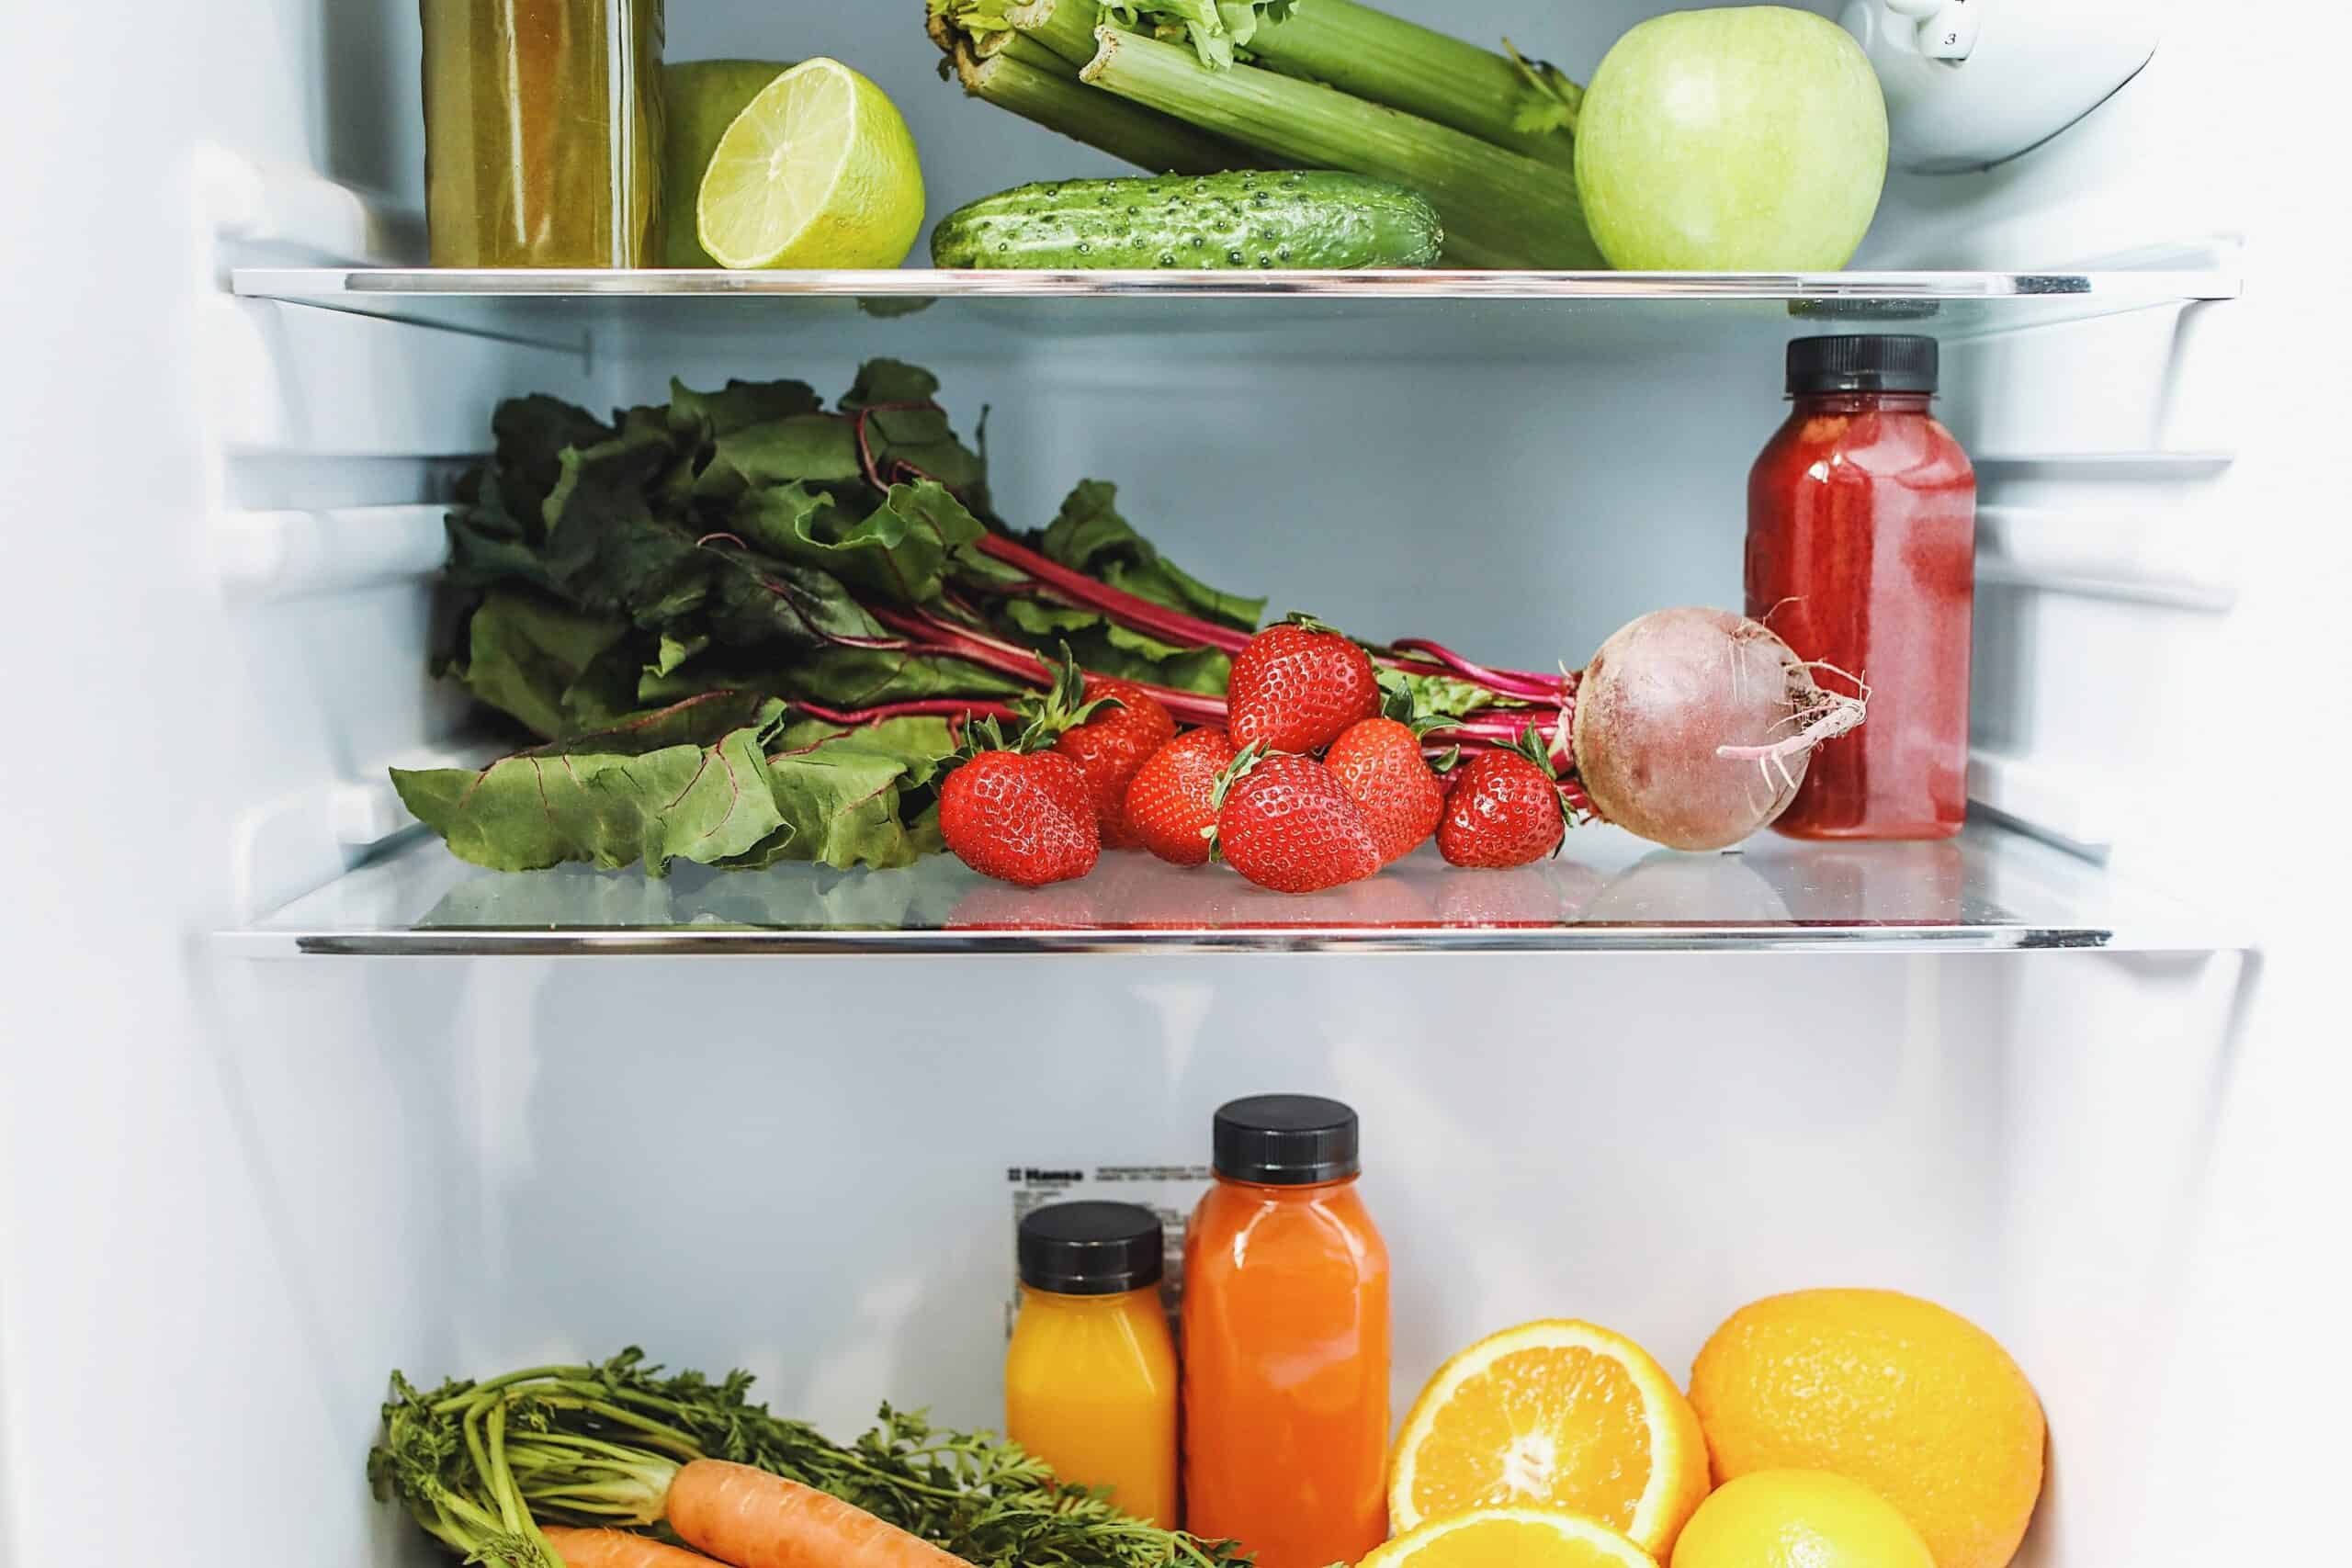 Refrigerator full of vegetables and fruits.